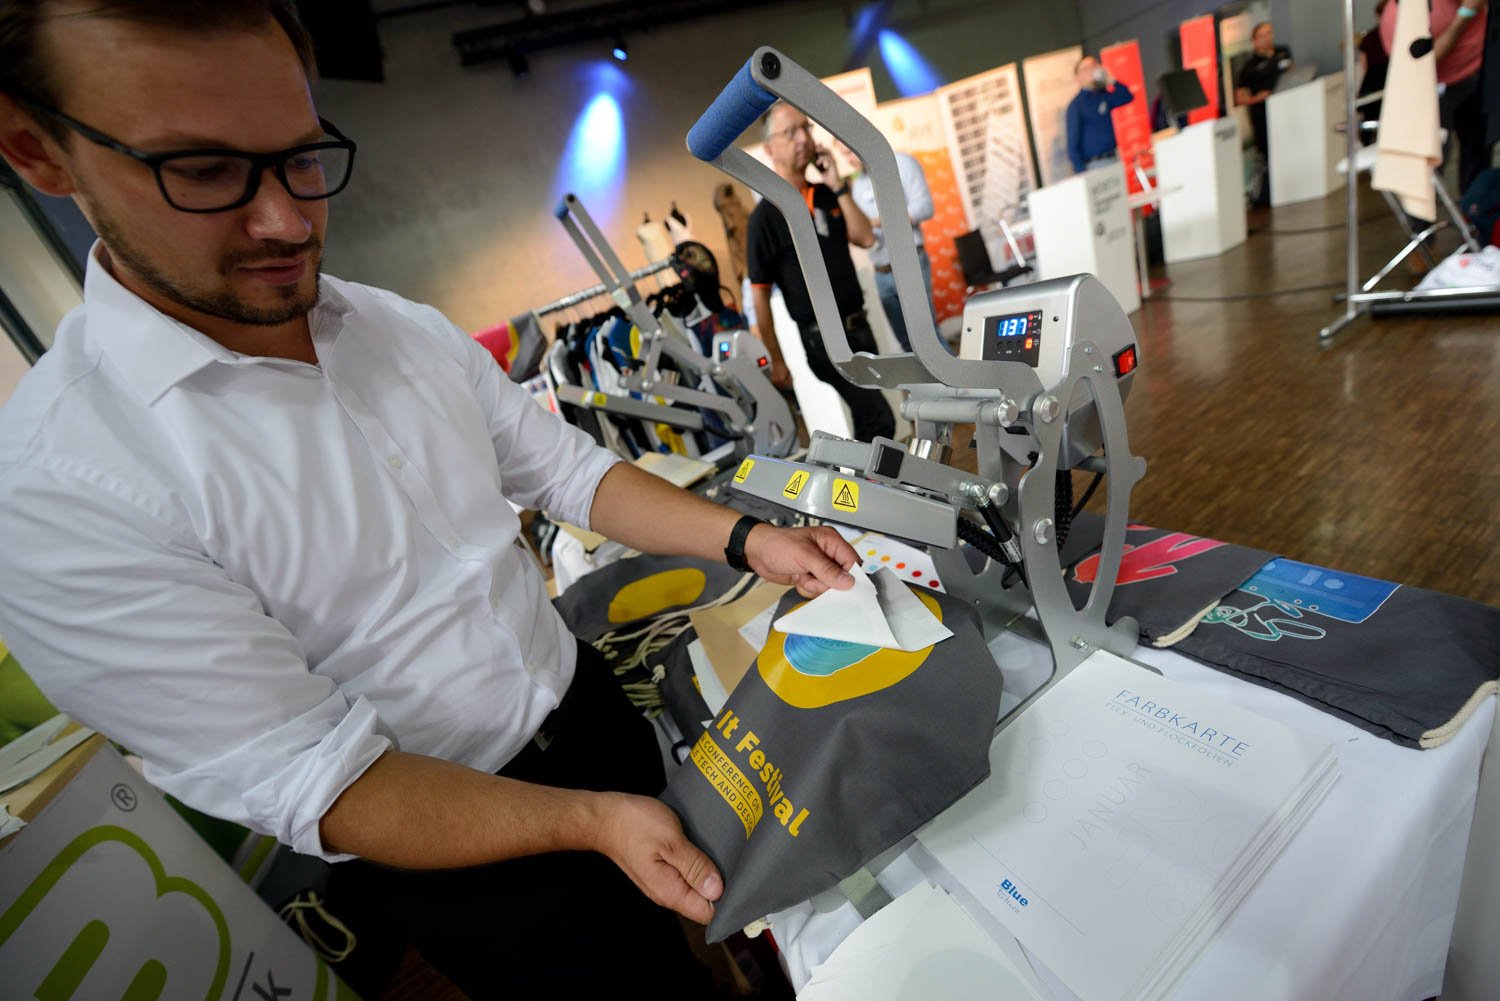 Rico Weigland (IVB Transferdruck)  demoing the DIY conference bags // Exhibition Hall at the Wear It Festival - The Conference on Wearables, fashion tech, smart clothing and consumer innovation on 19-20 June 2018 at the Kulturbrauerei Berlin - (c) Wear It Berlin / Michael Wittig, Berlin